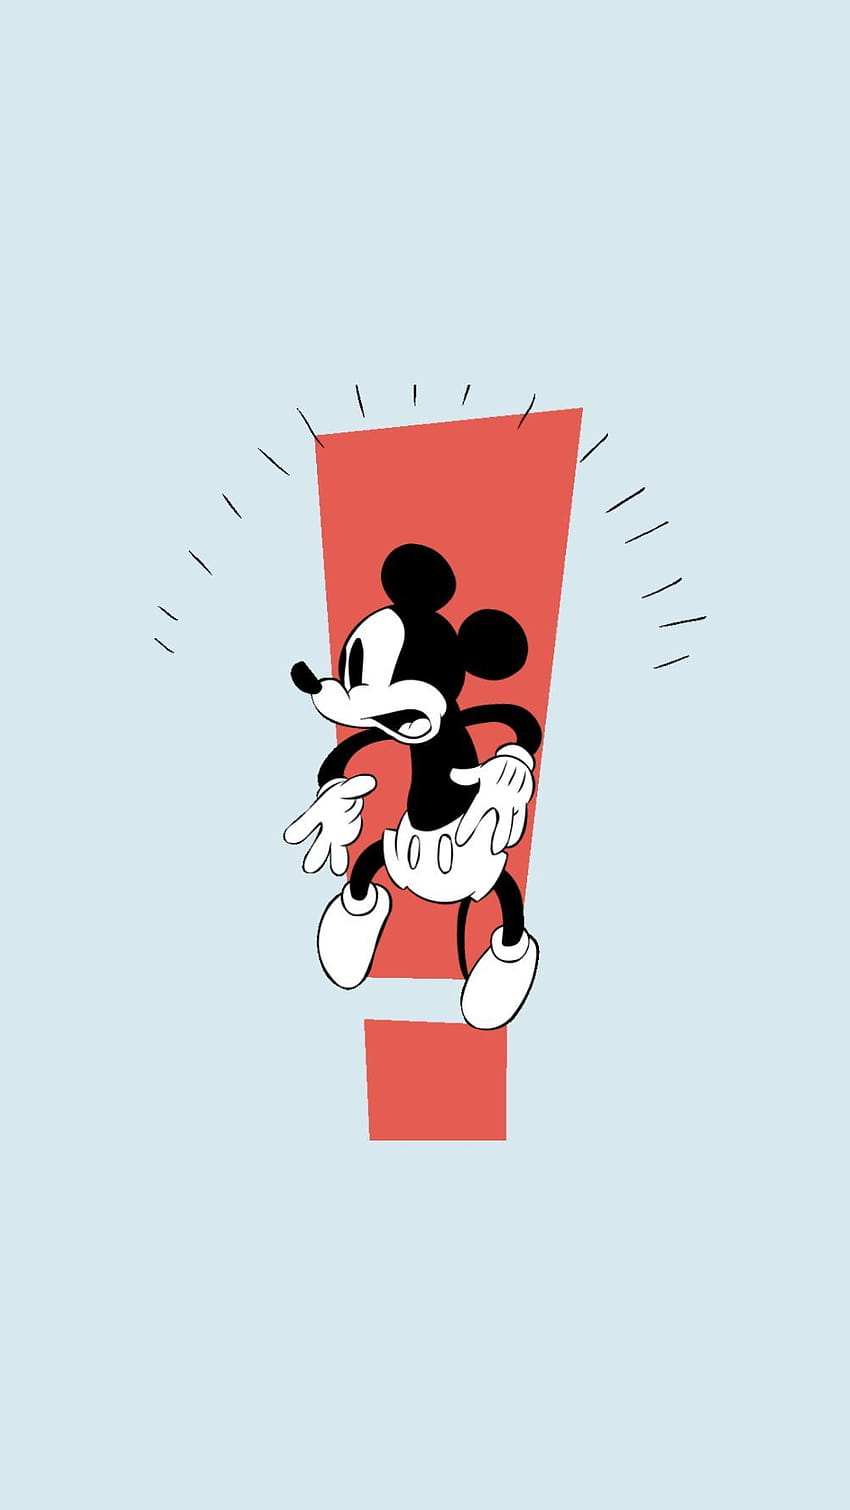 iPhone from Uploaded by user, mickey mouse memes HD phone wallpaper